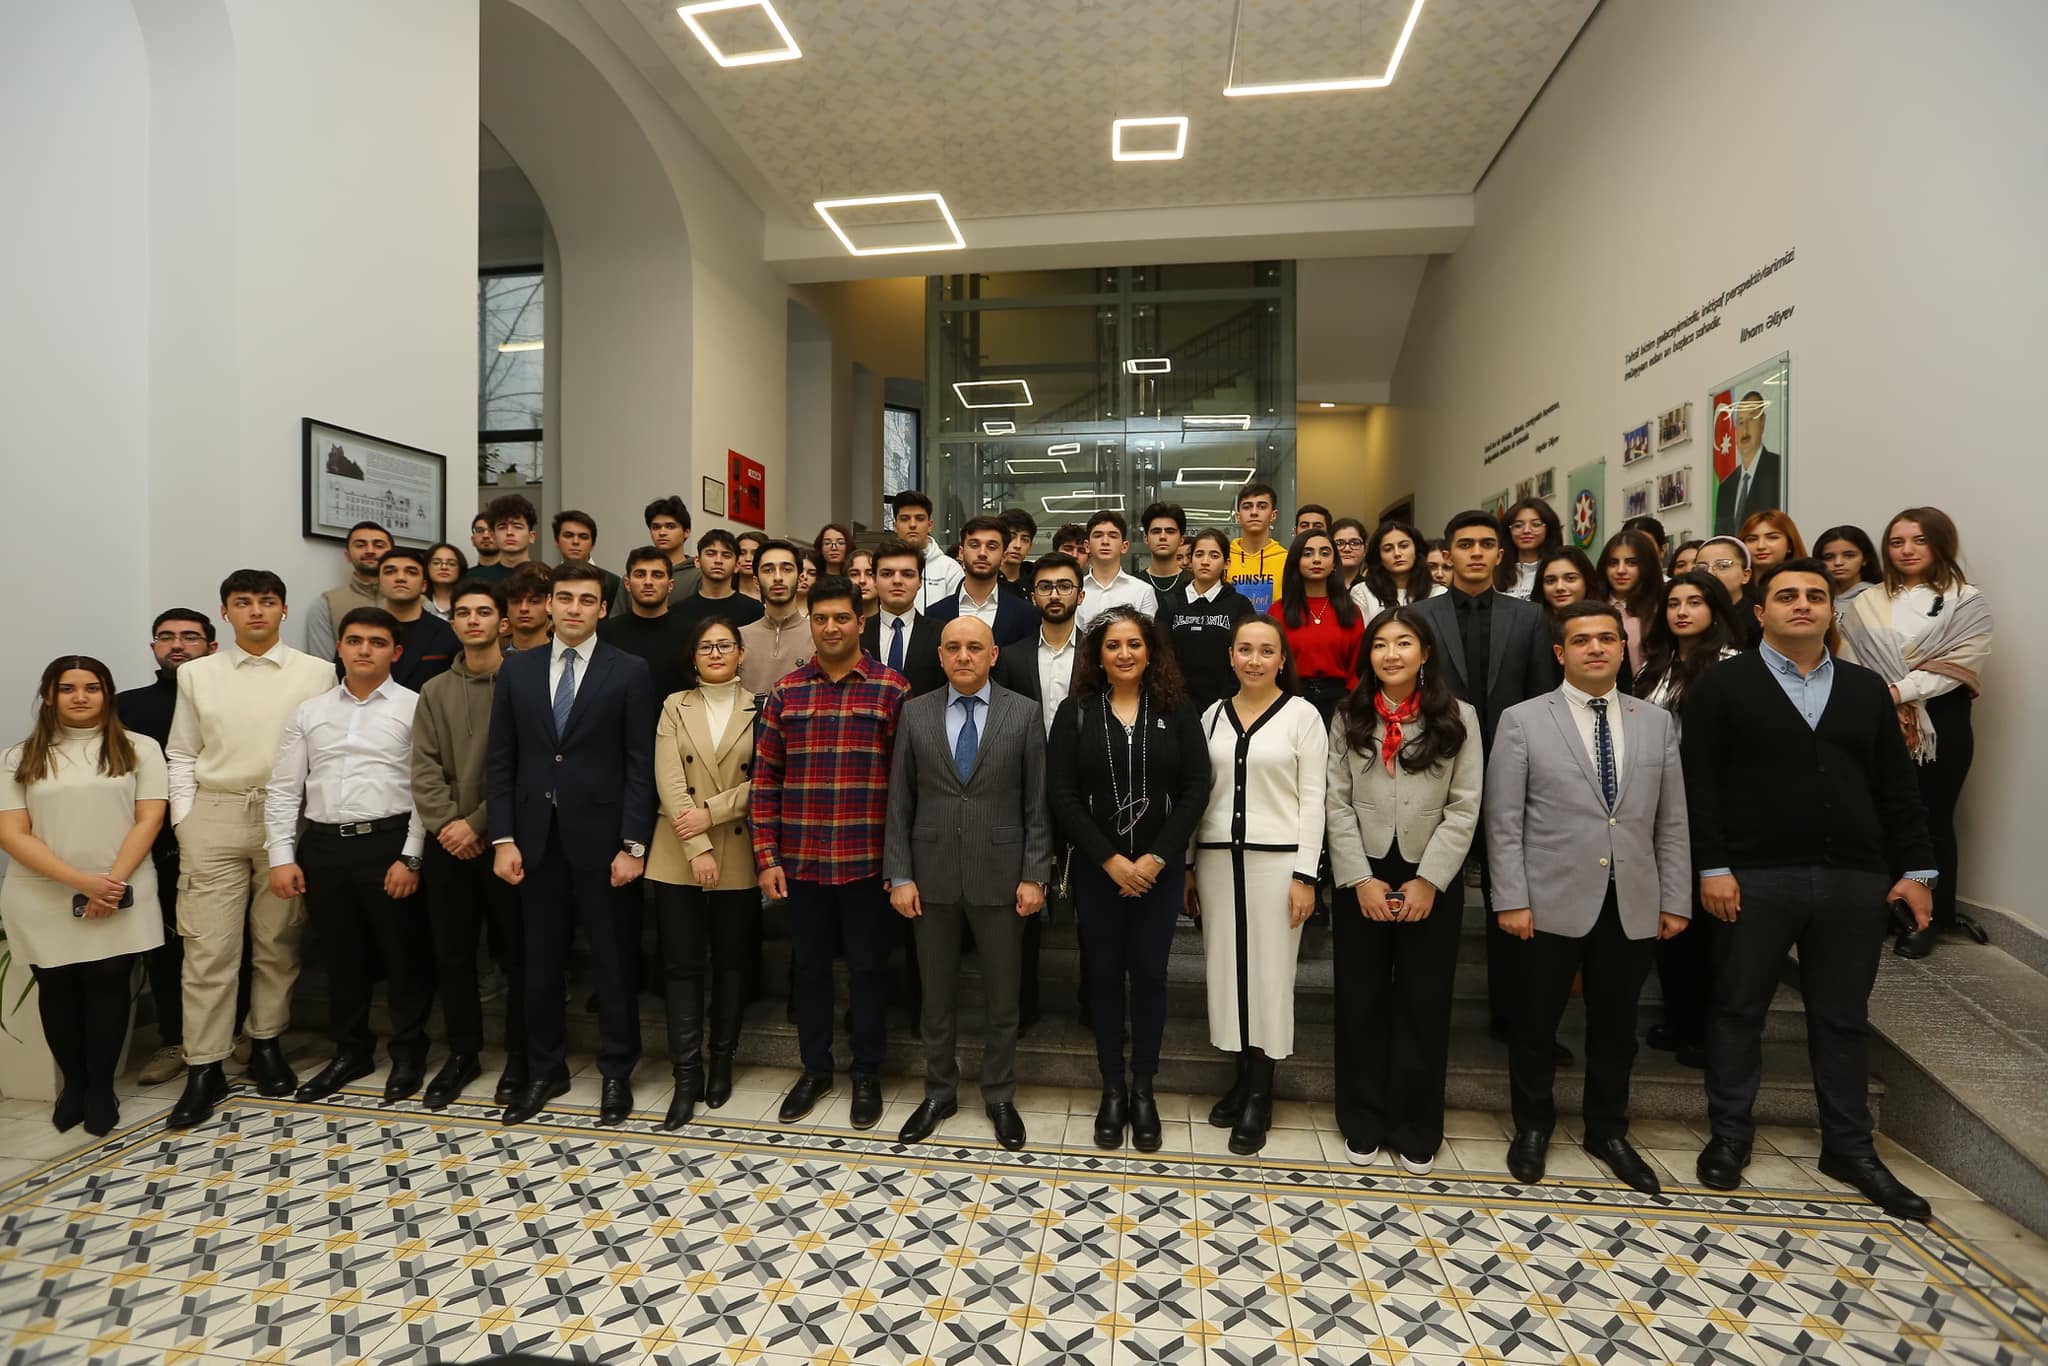 On January 22, a conference on "Participation of youth in the election process" was held at the Azerbaijan-French University.